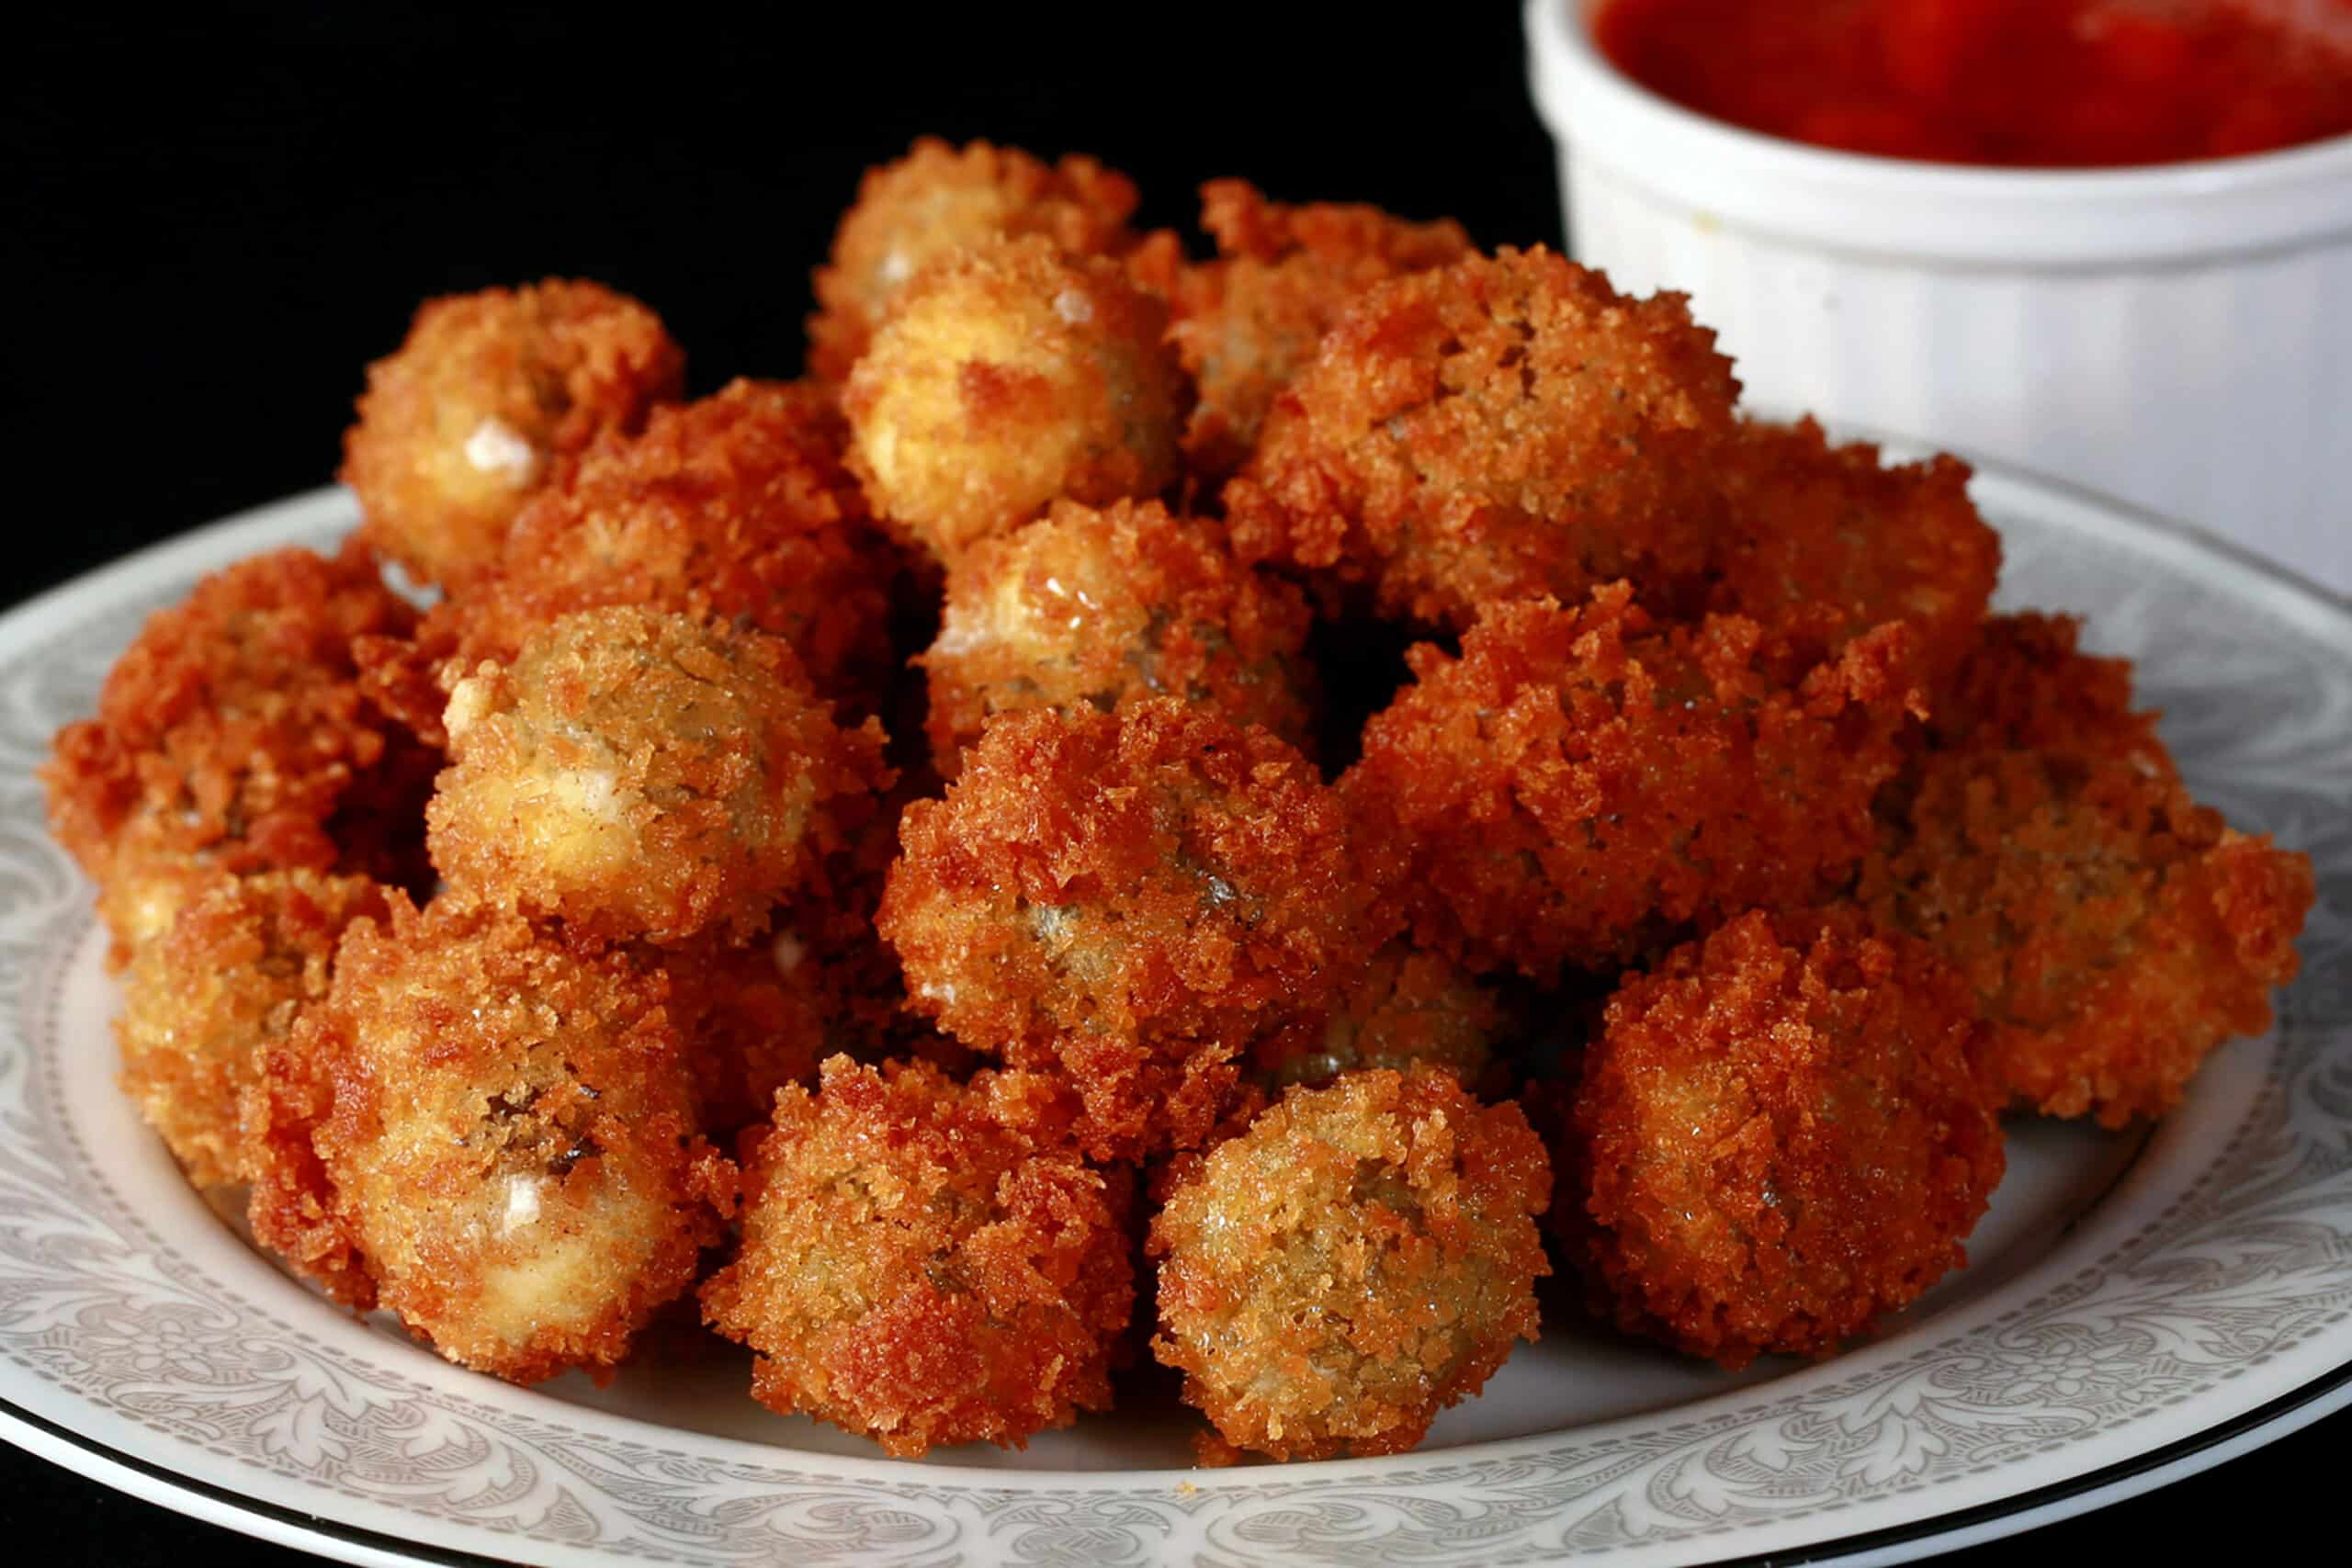 A plate of crispy deep fried olives with a small bowl of marinara sauce in the background.